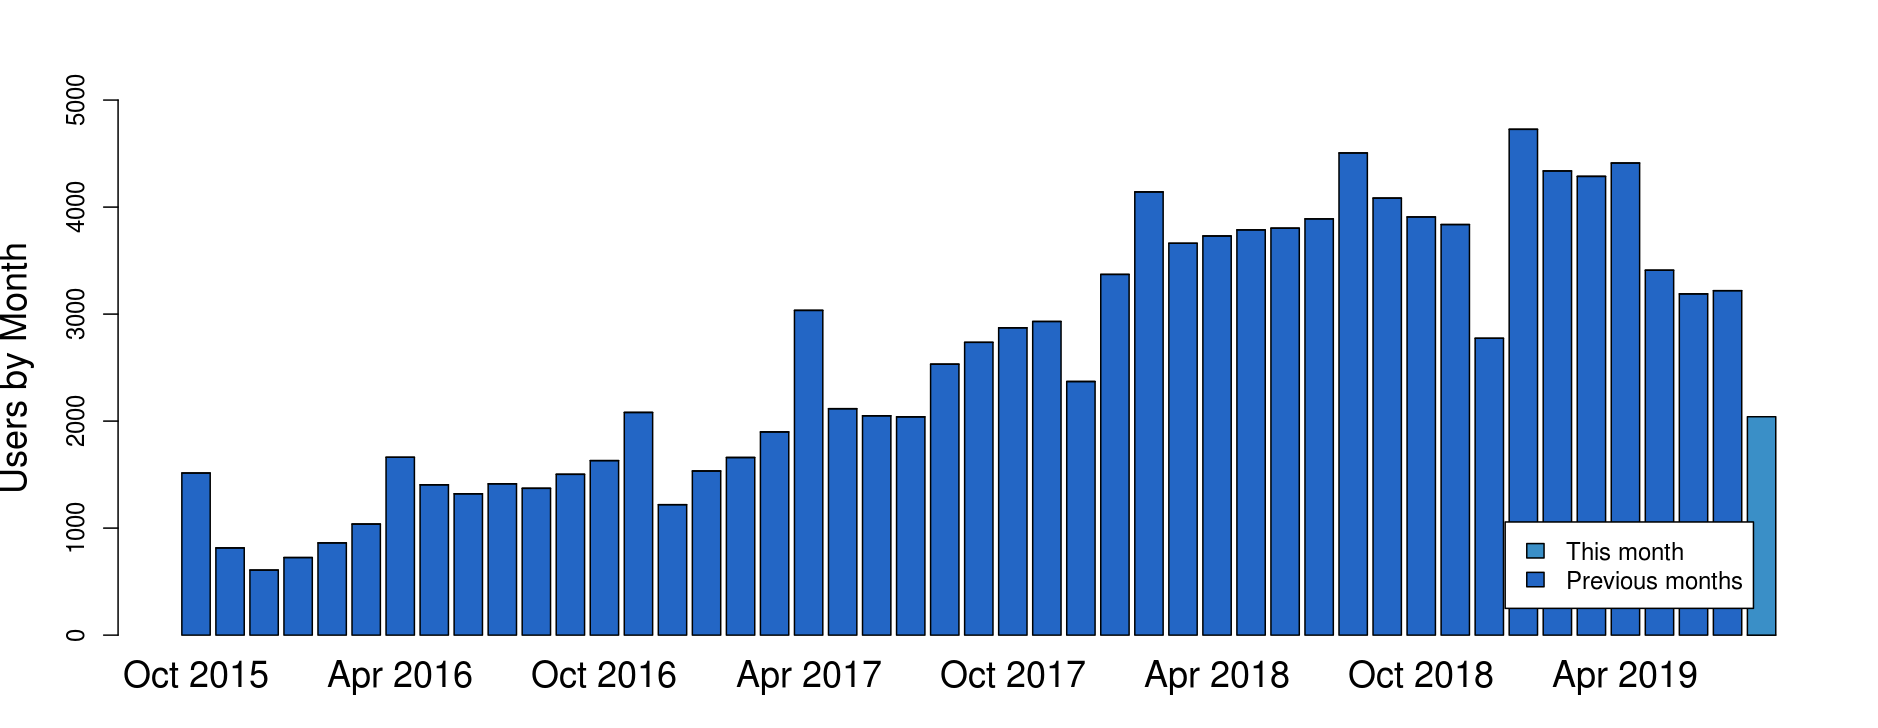 Chart of the number of users by month